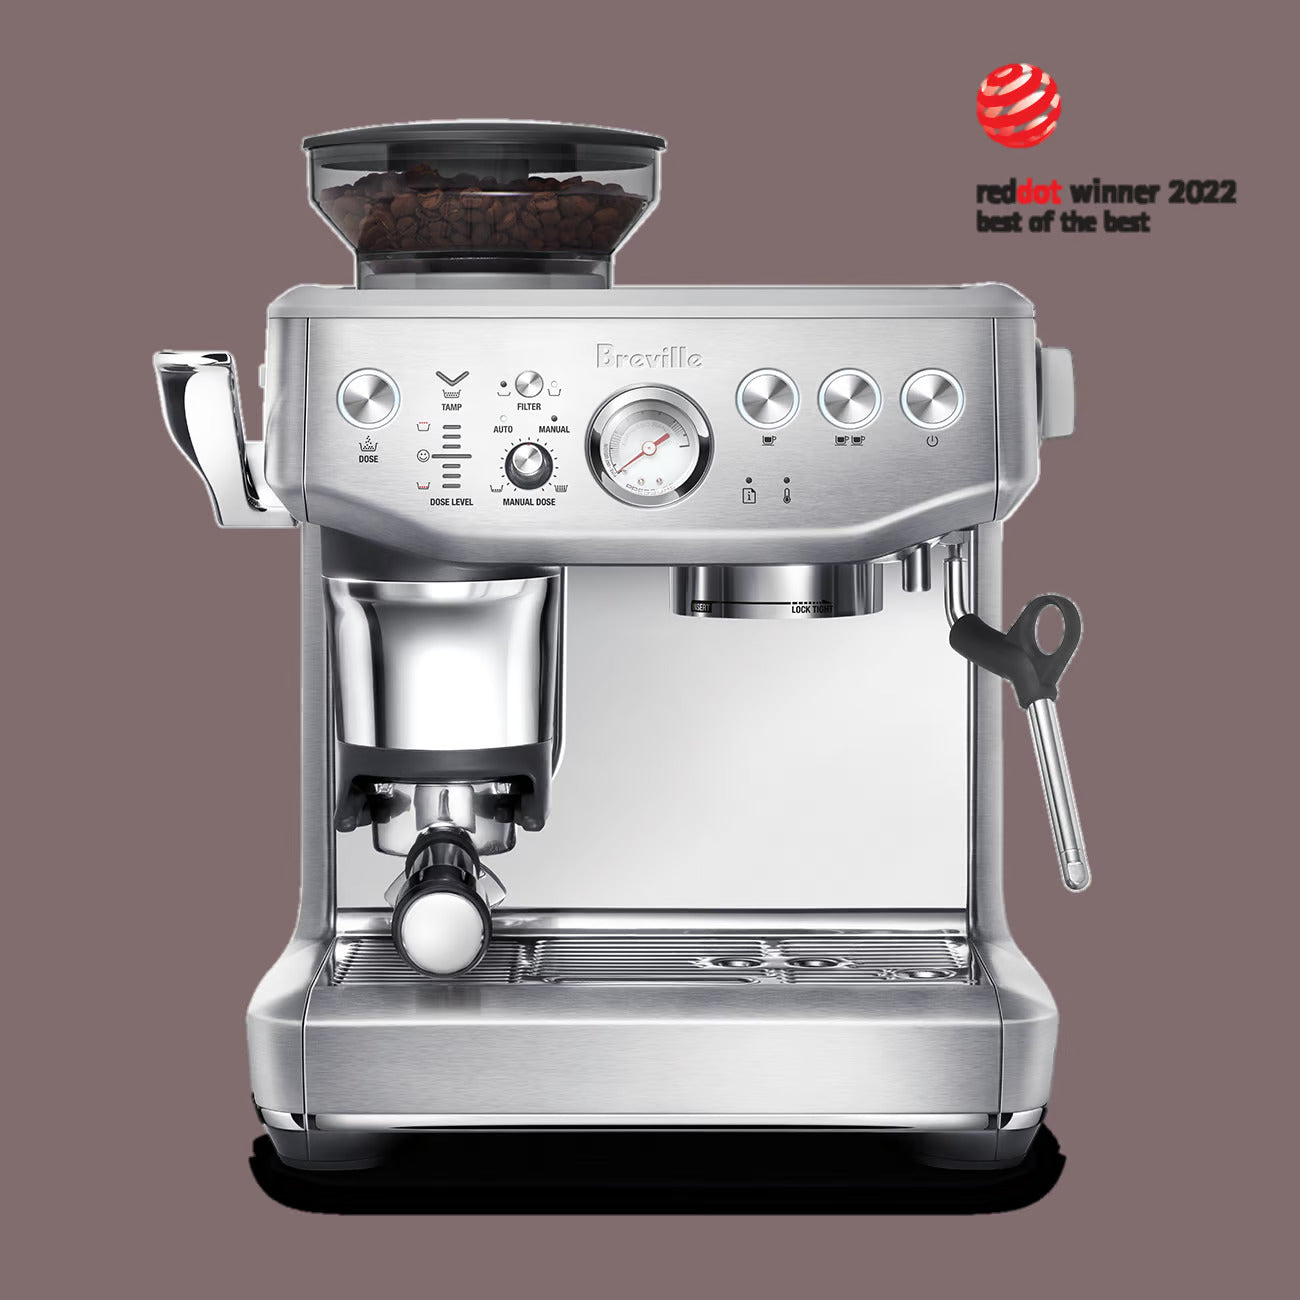 Breville Barista Express Impress Manual Espresso Machine with free coffee and accessories